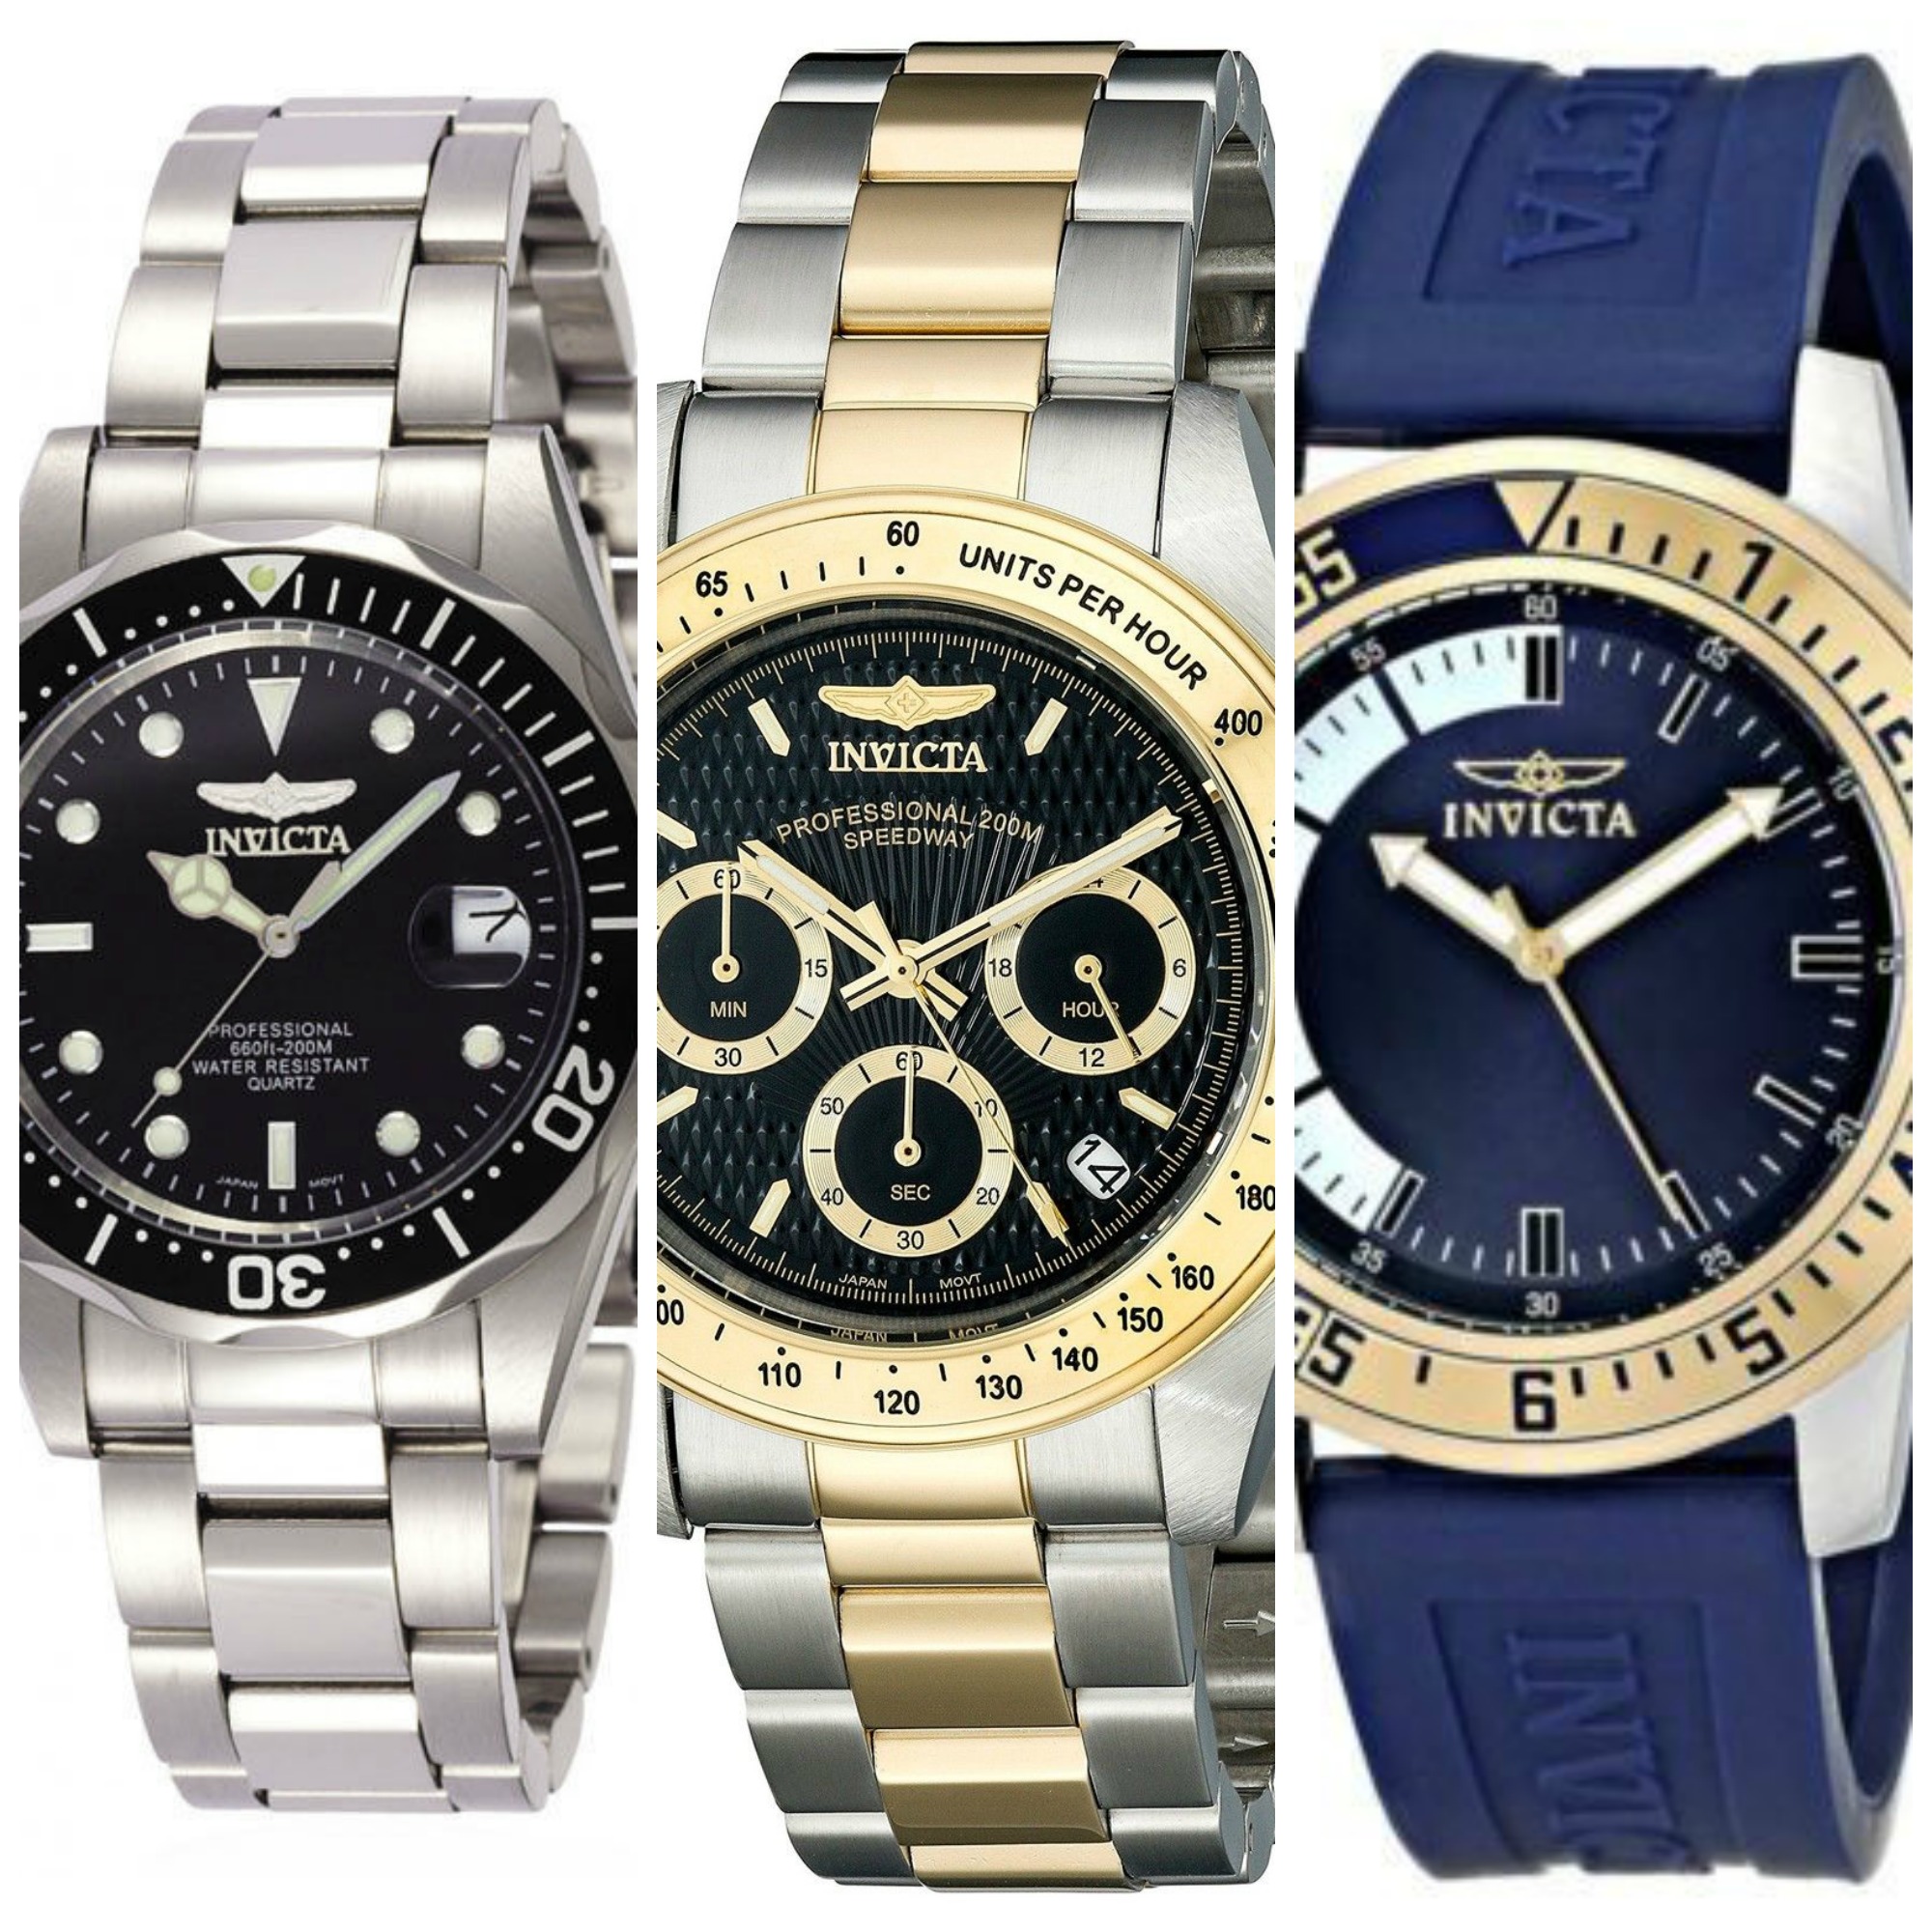 7 Best Cheap Invicta Watches For Men, Most Popular And